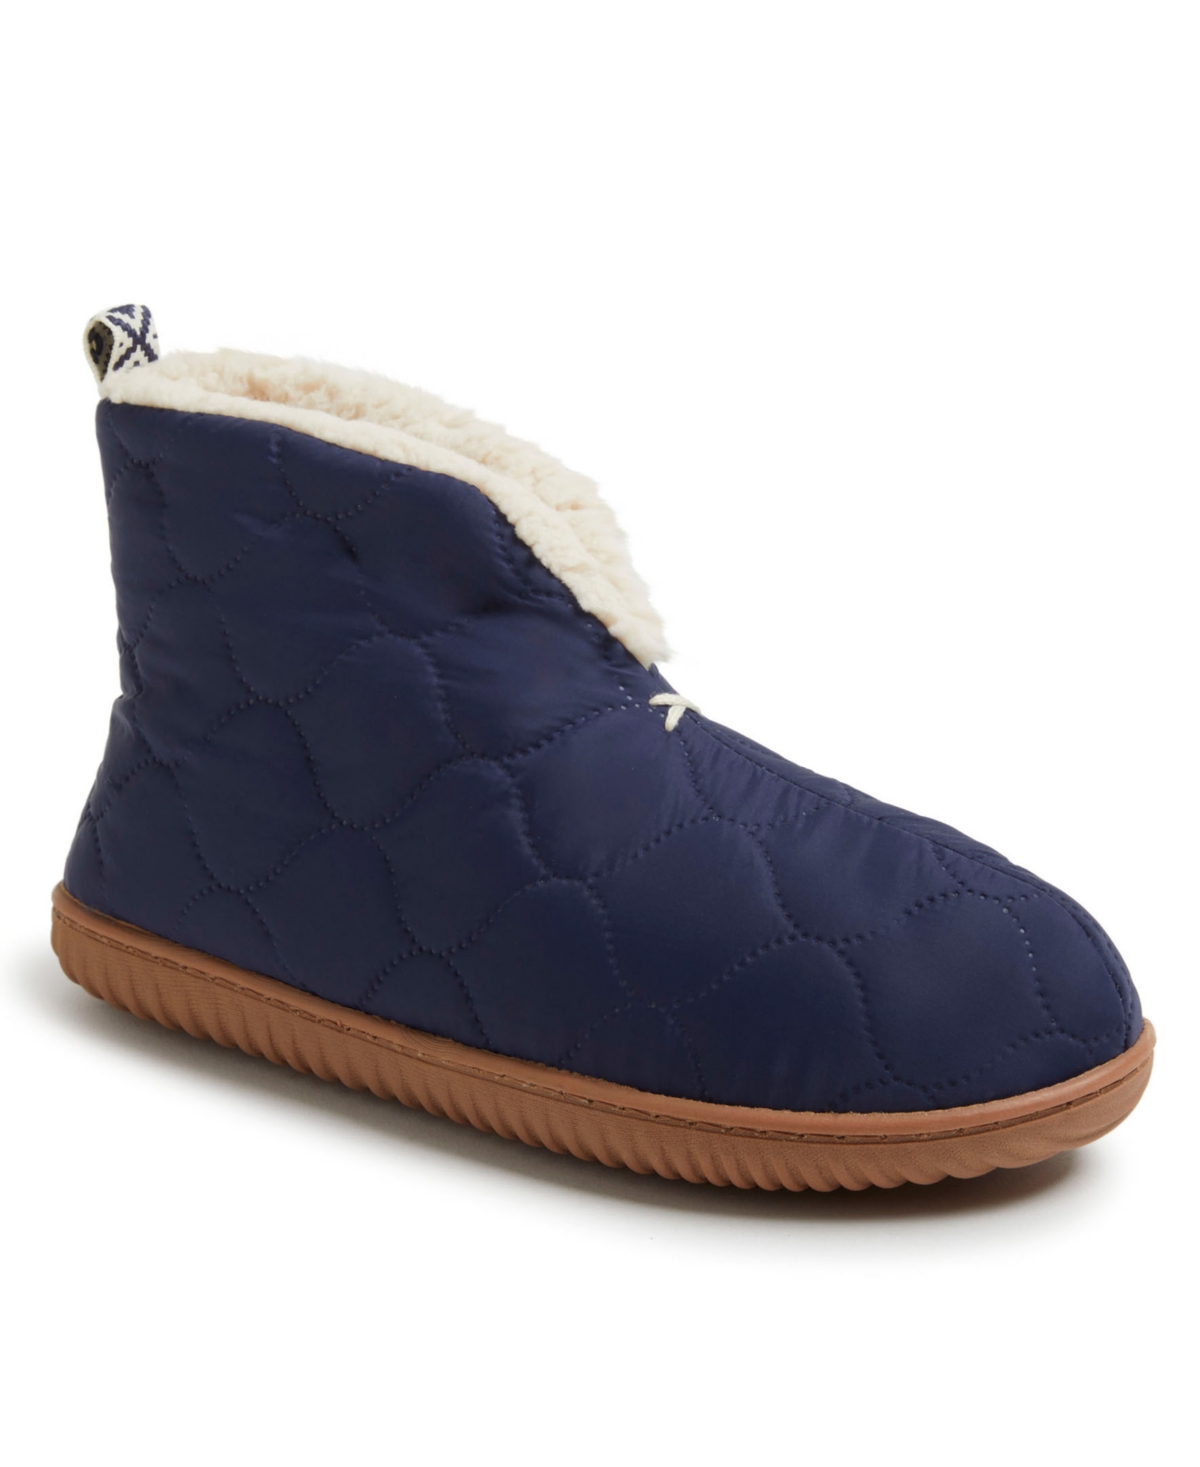 Women's Warm Up Bootie Slippers - Pavement